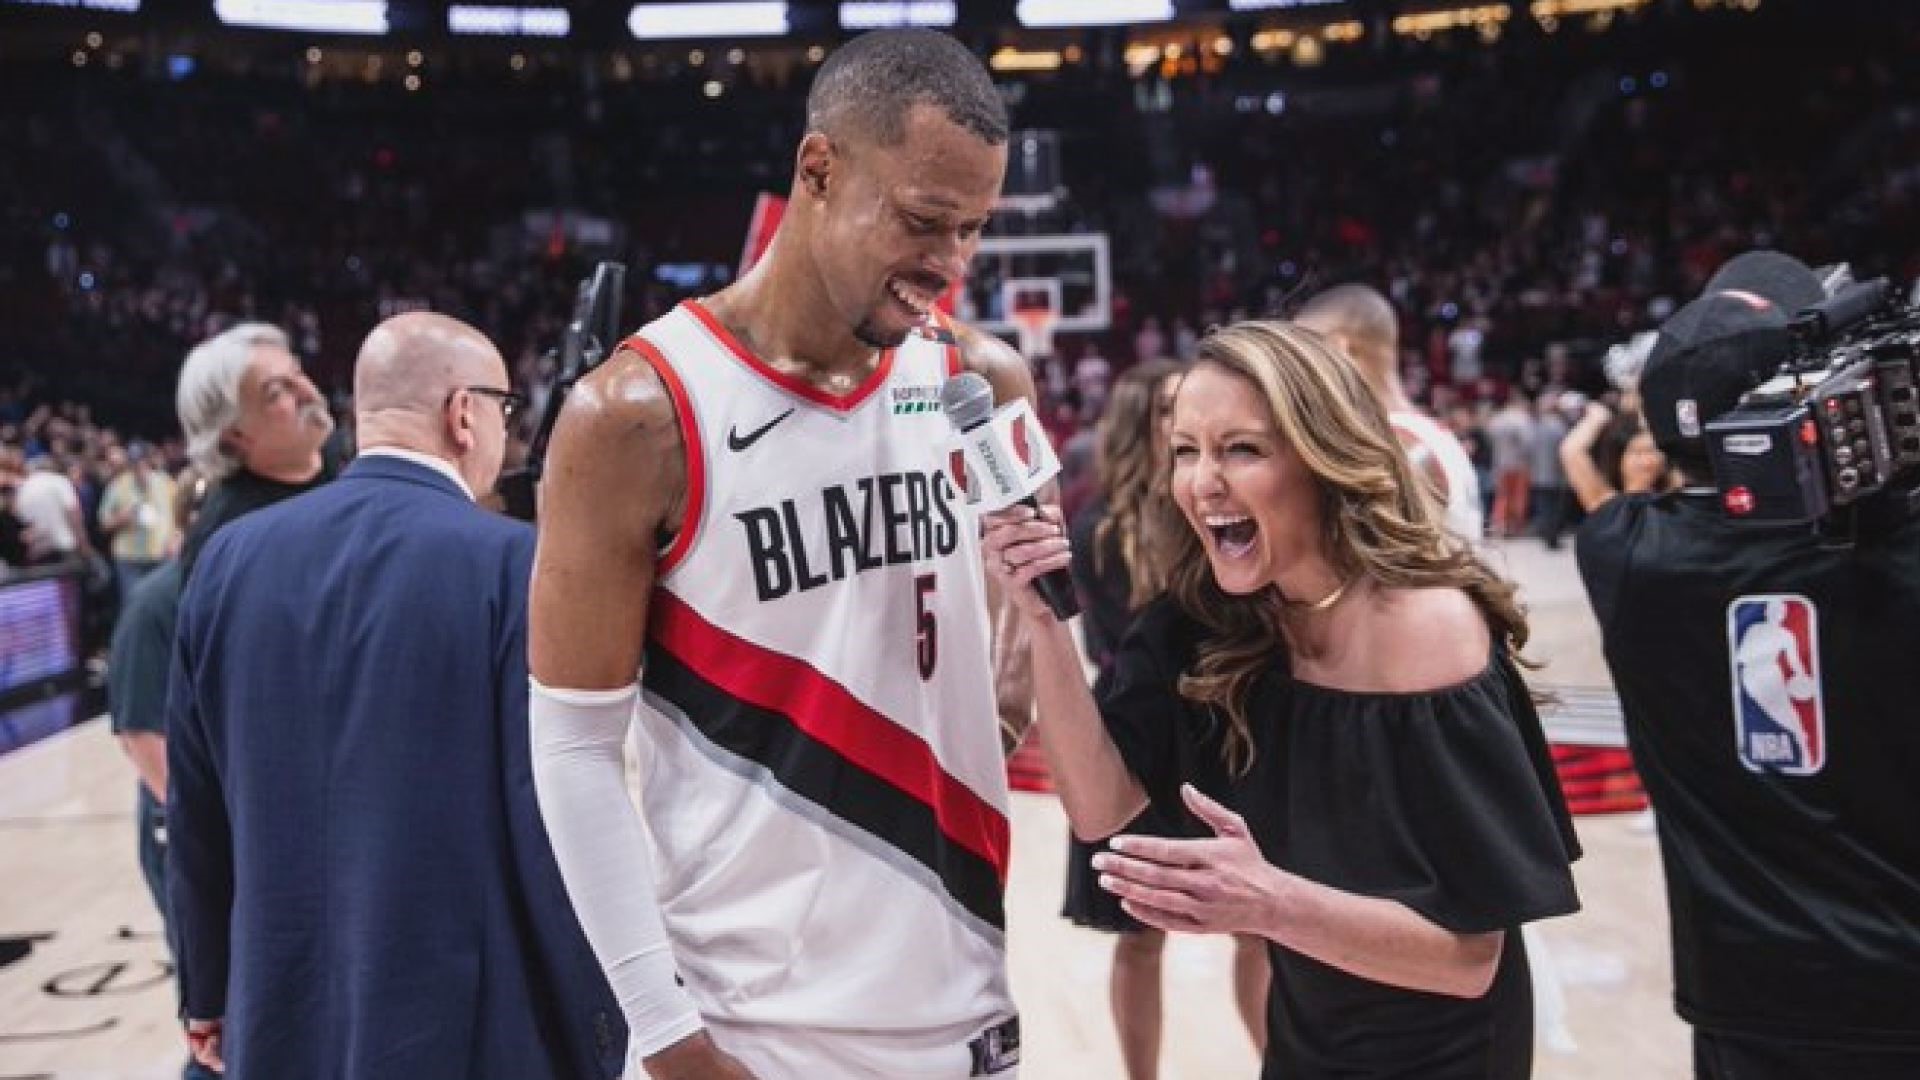 Olzendam is one of just 30 NBA team sideline reporters.